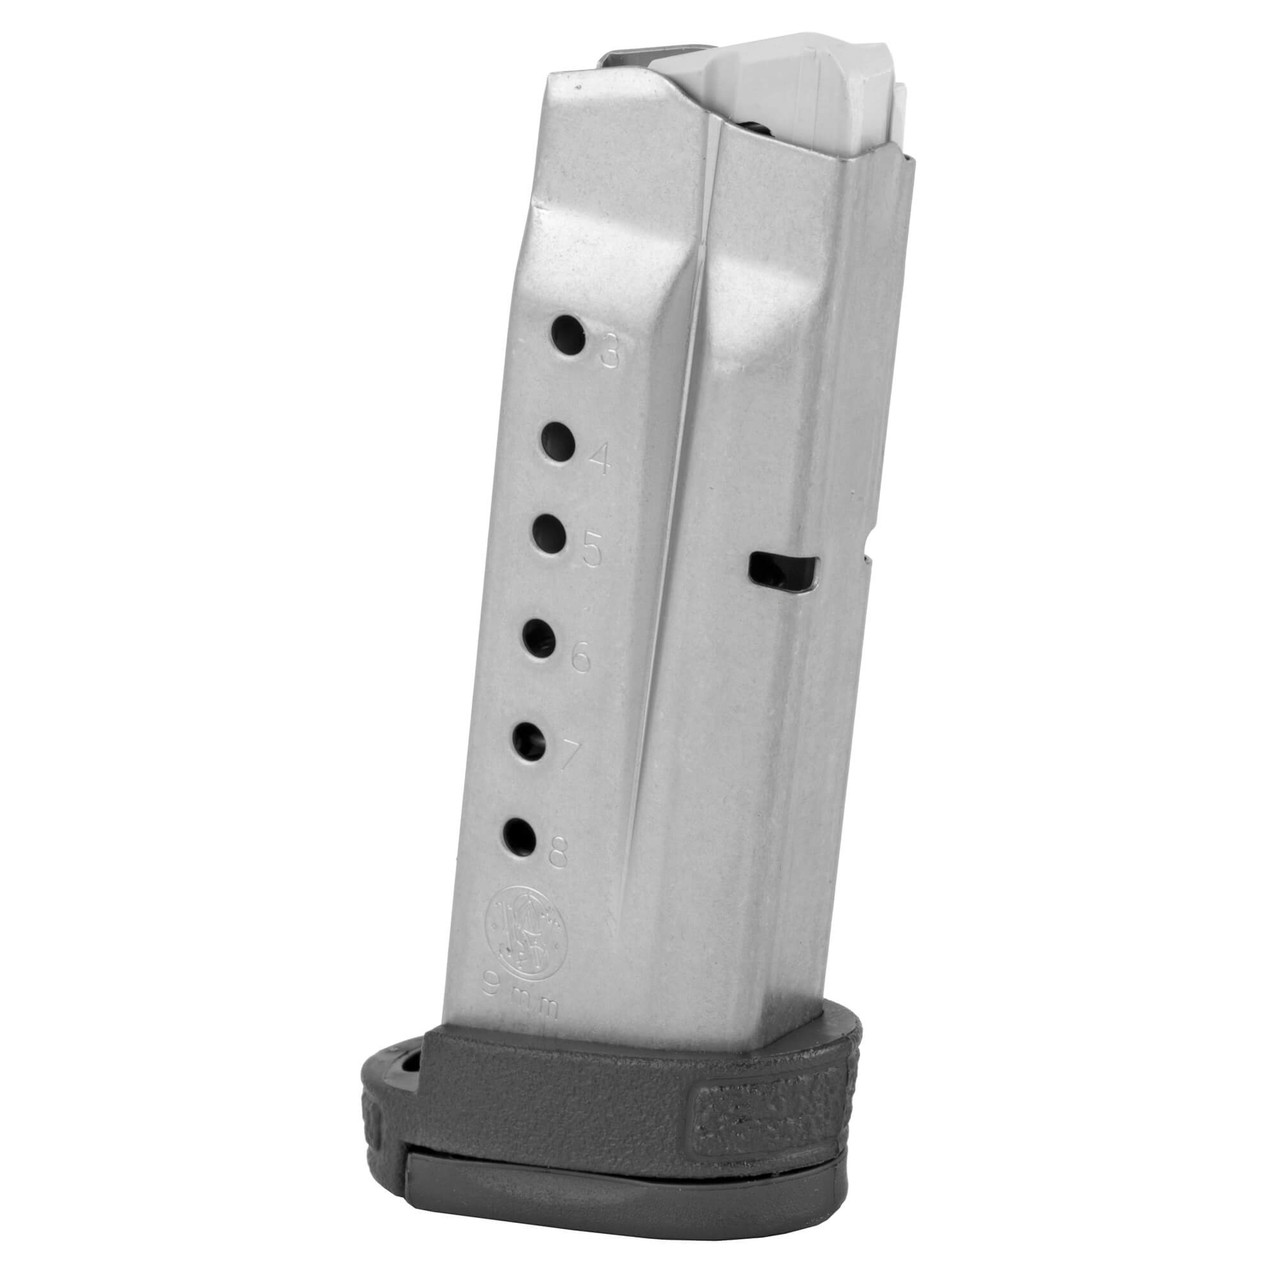 Smith & Wesson M&P Shield 8rd Magazine in 9mm Right Side